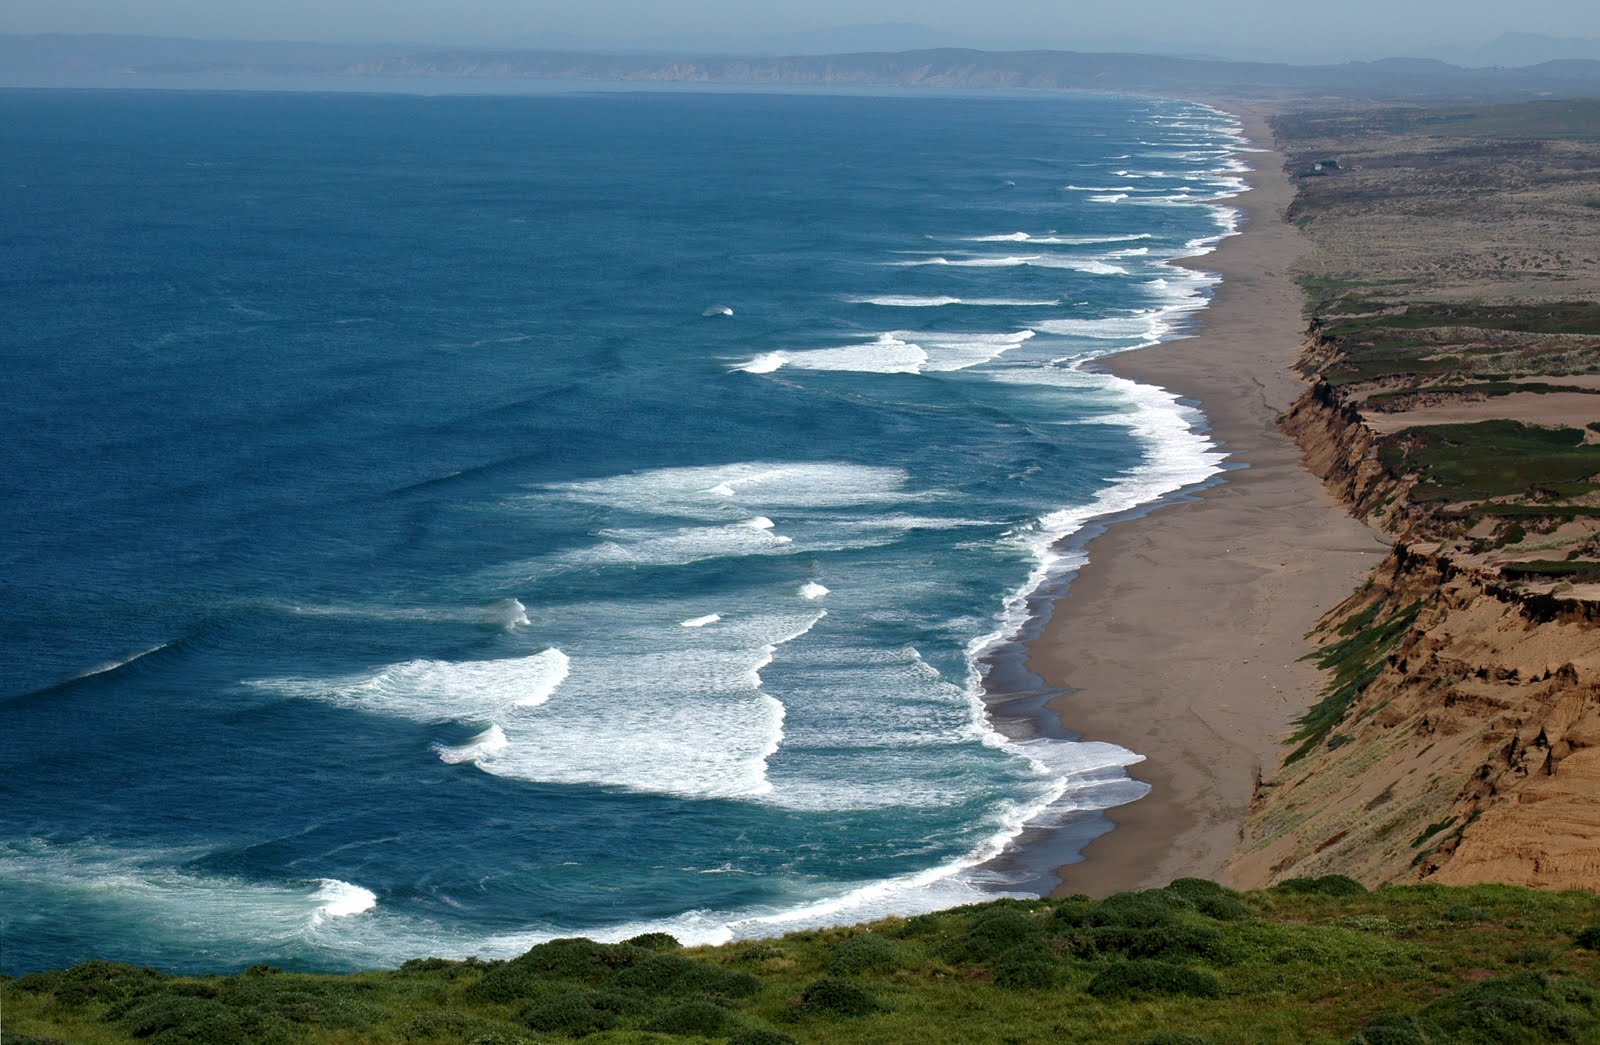 cities close to point reyes seashore